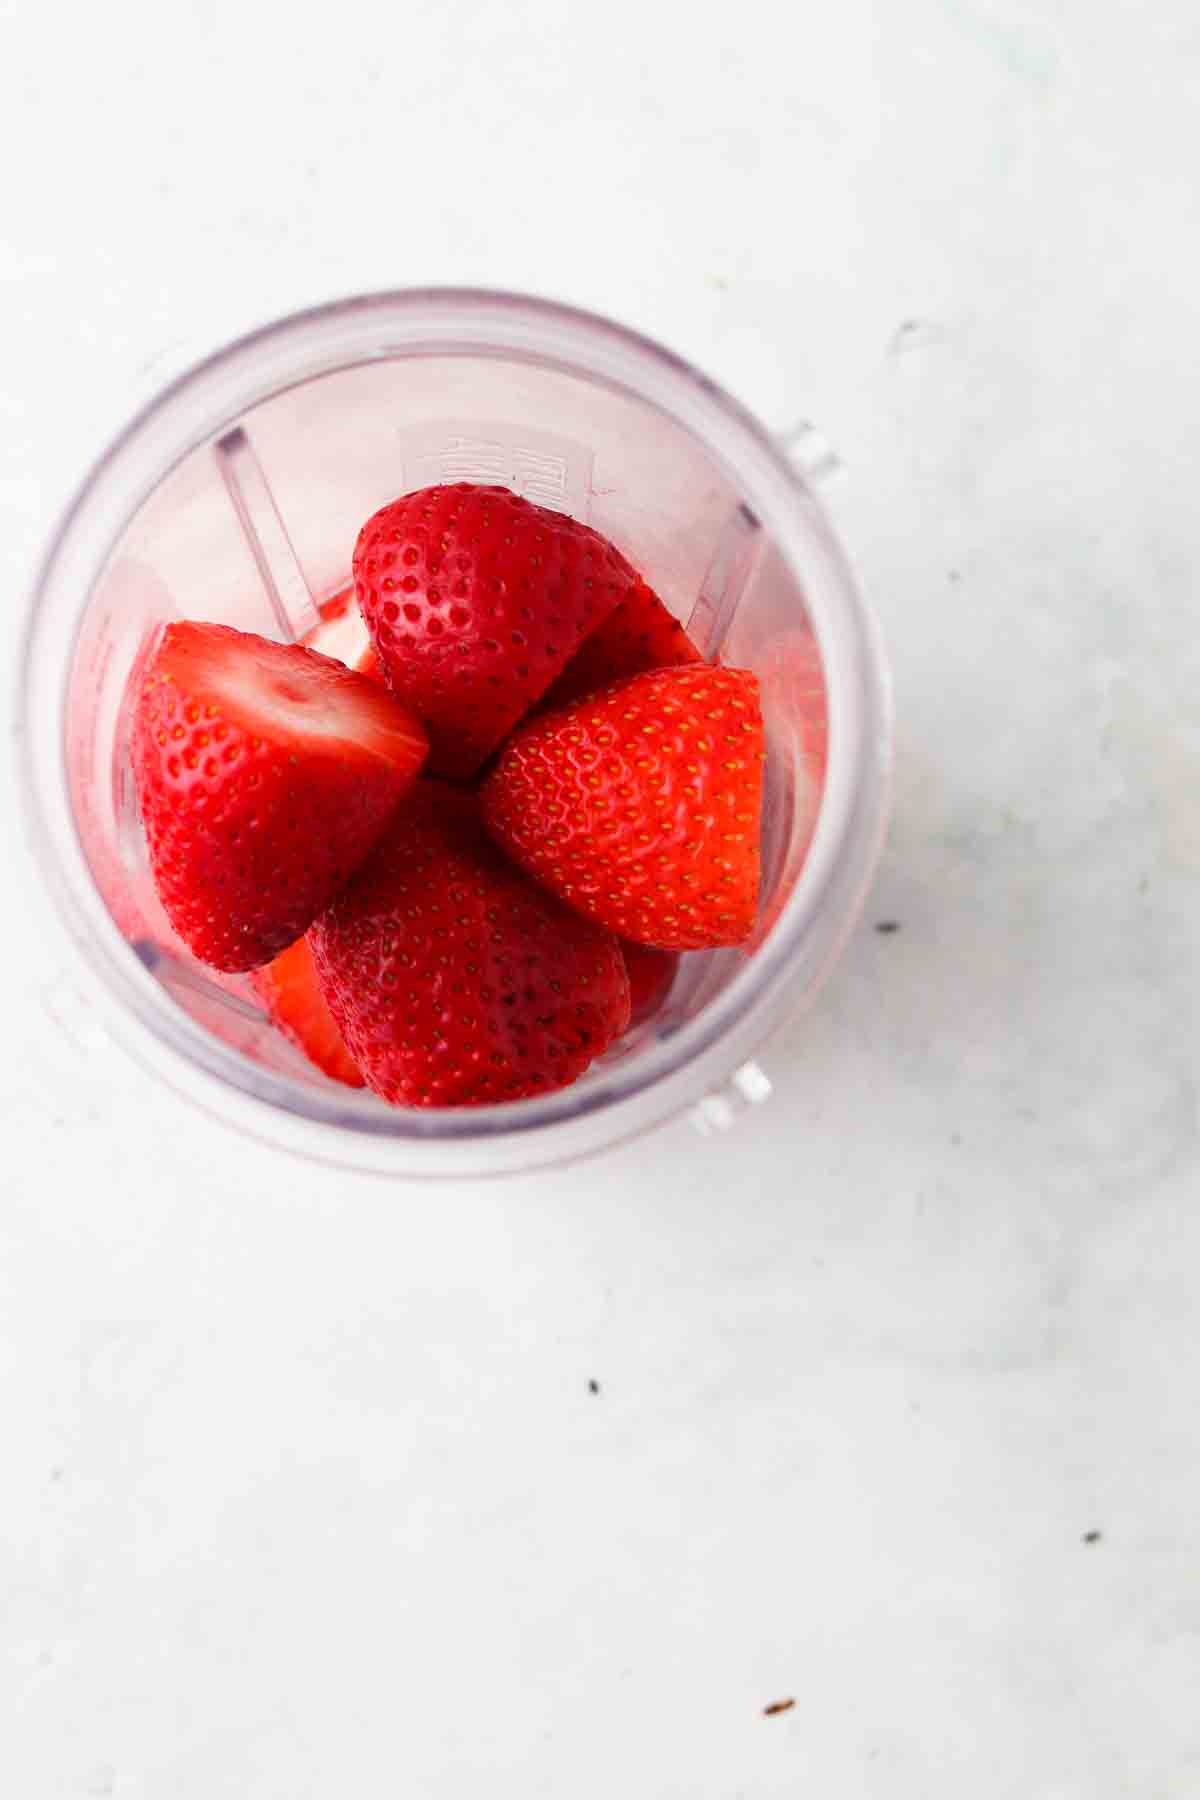 Strawberries in a food processor.